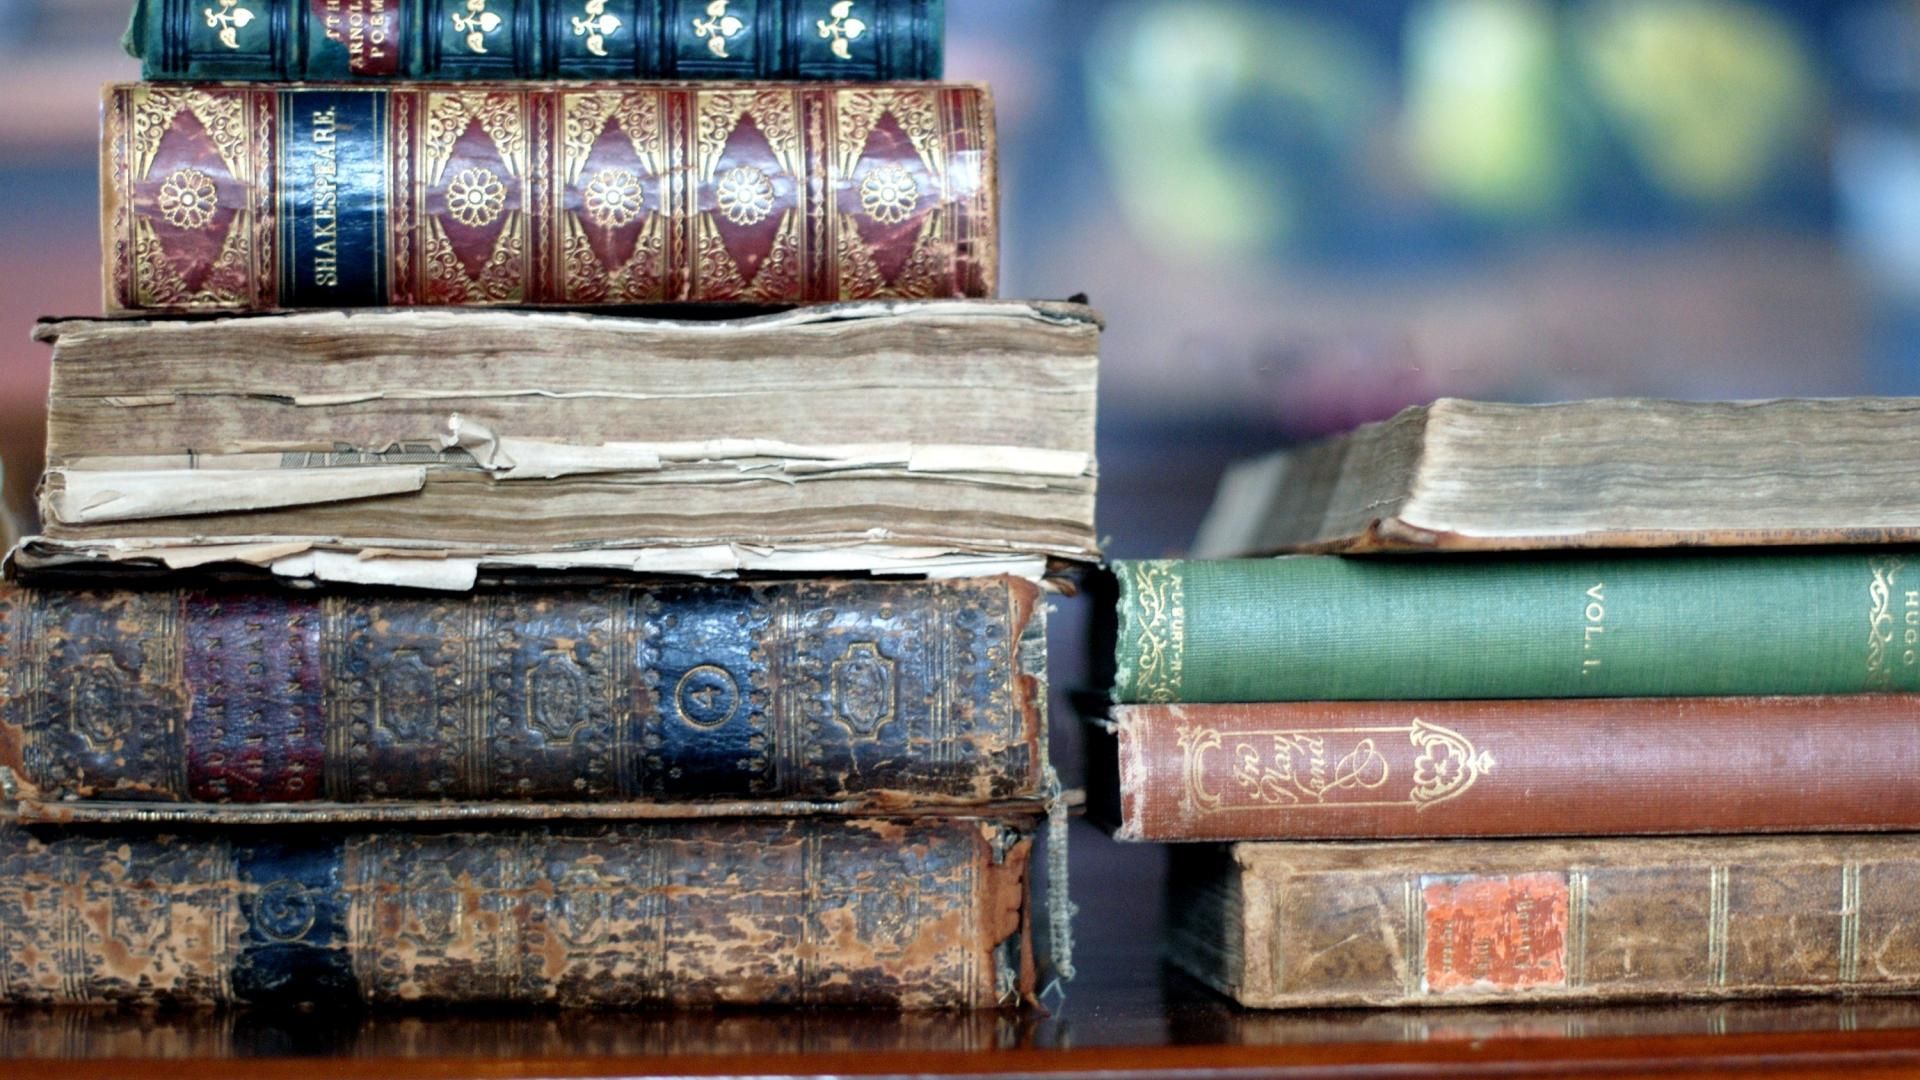 1920x1080 Download Wallpaper book old library, , Old books